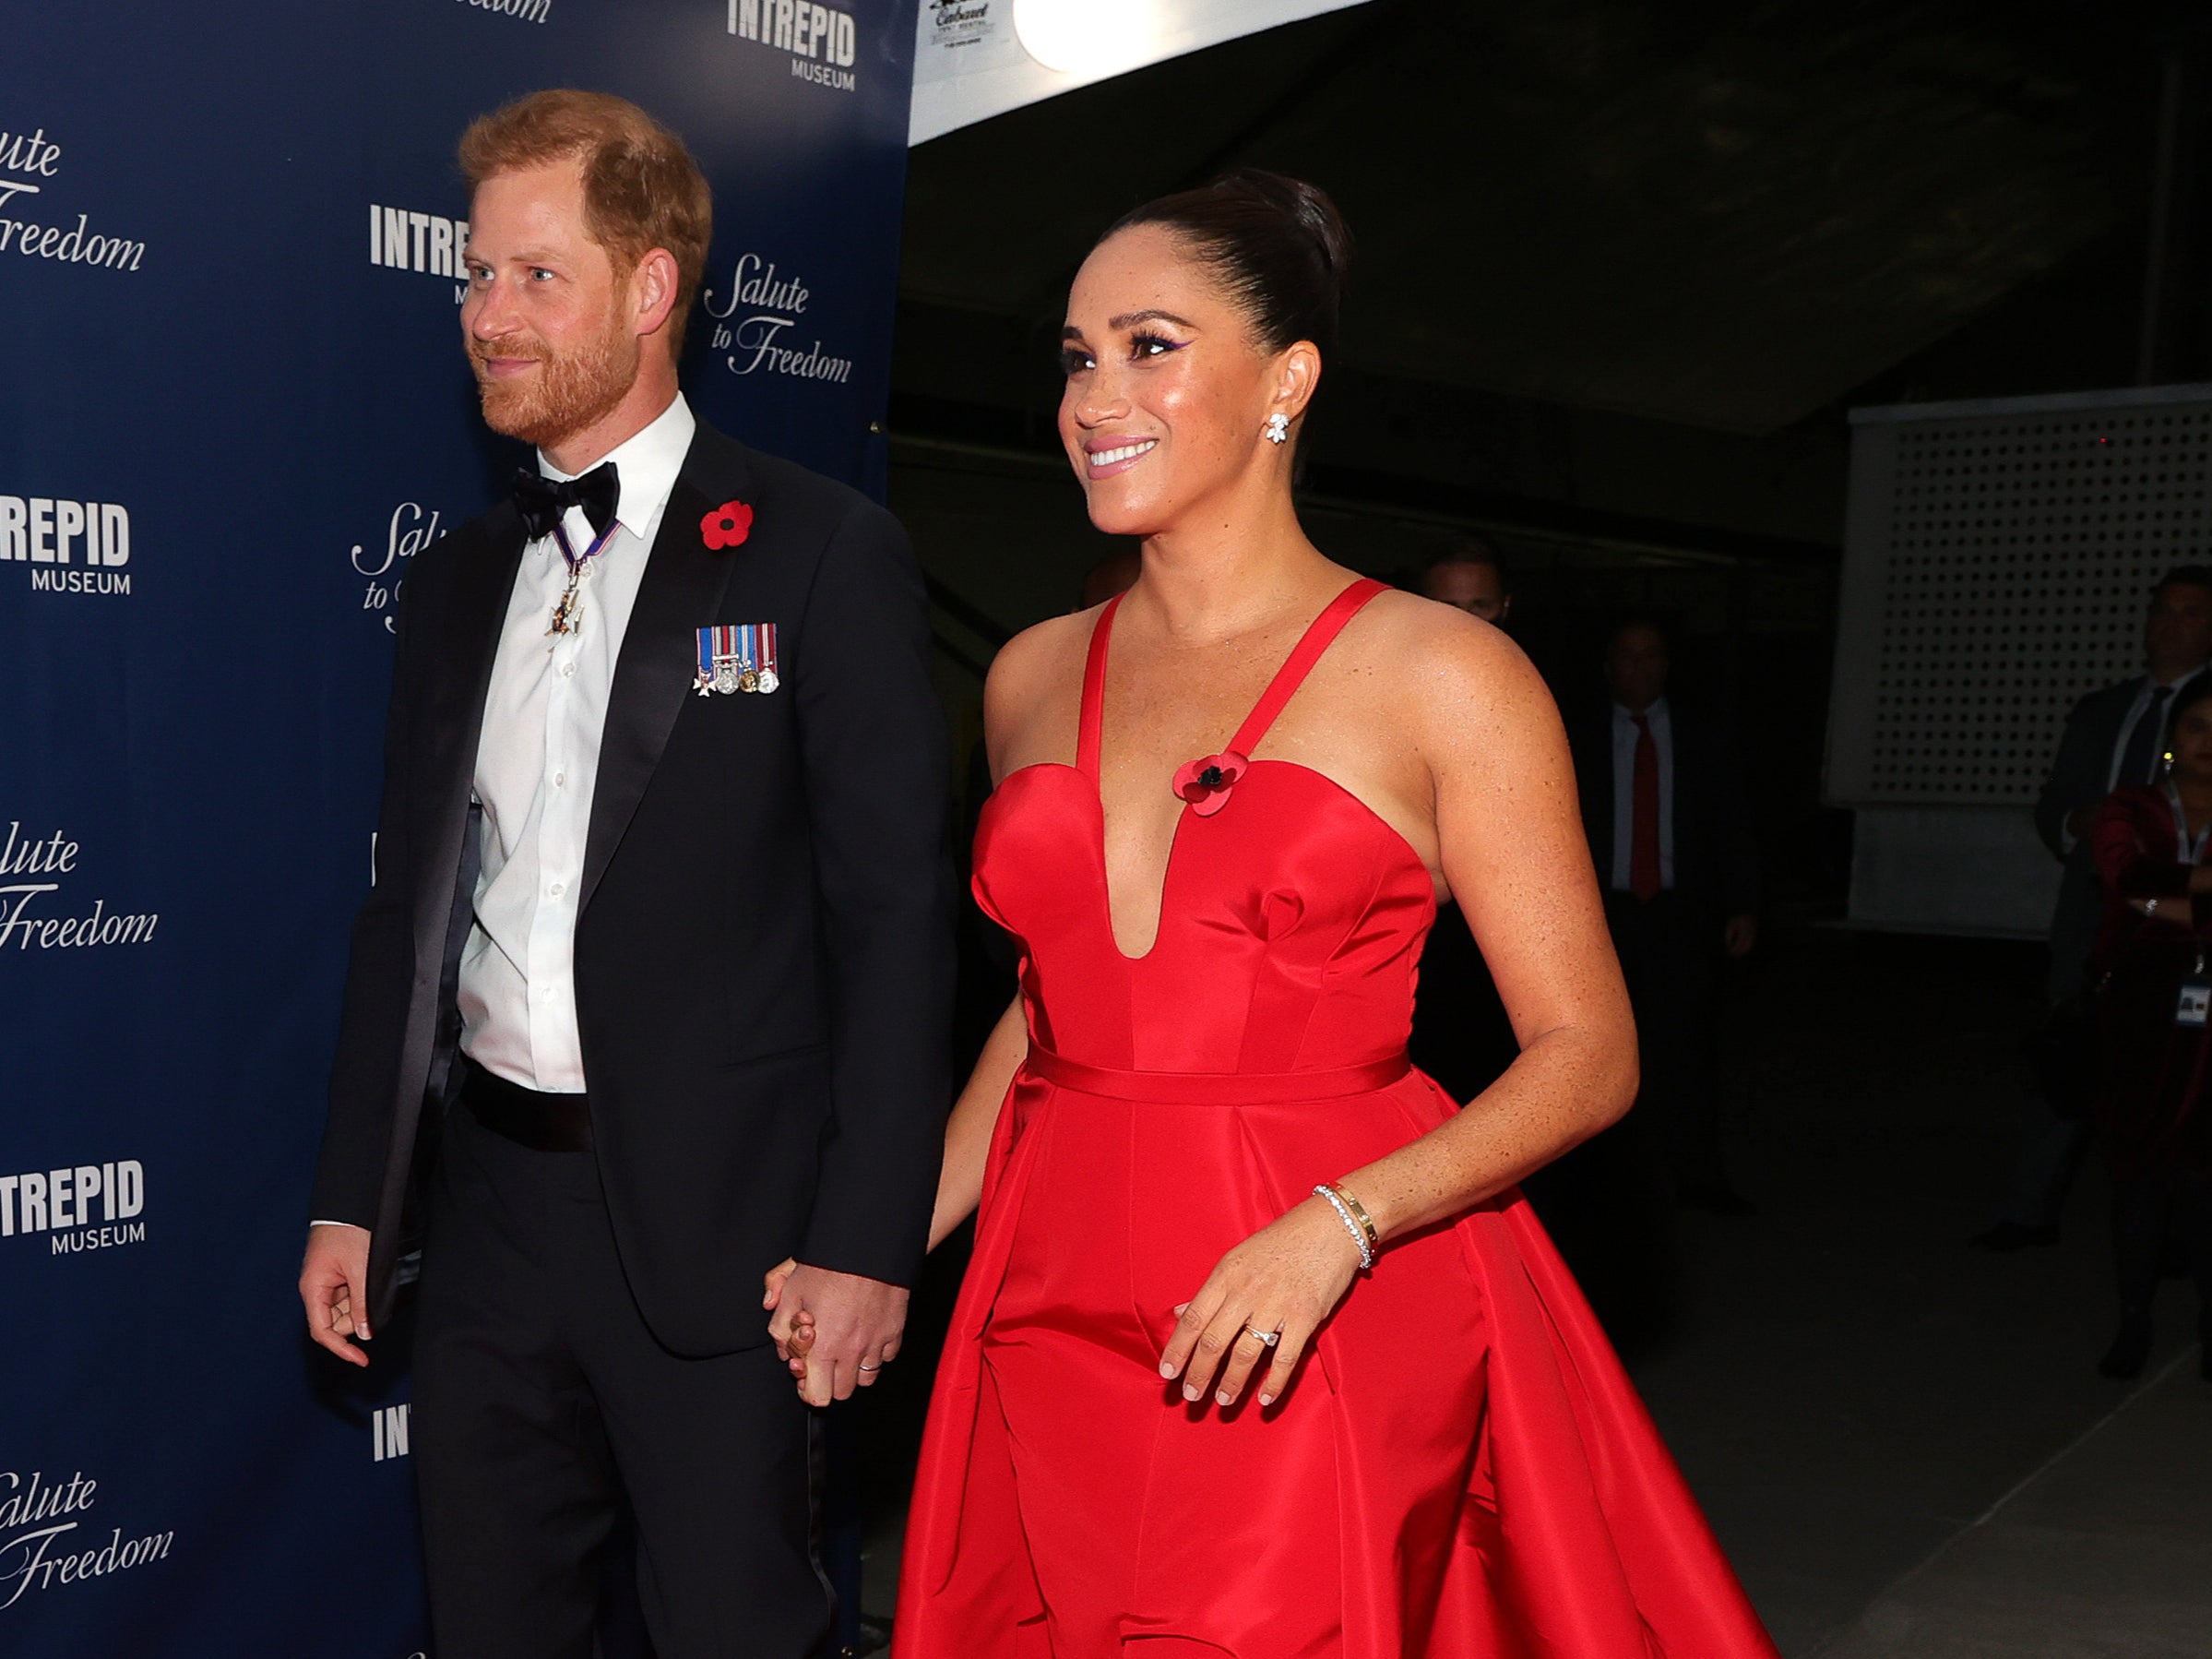 Meghan Markle and Prince Harry (L) attend Salute to Freedom Gala in New York City